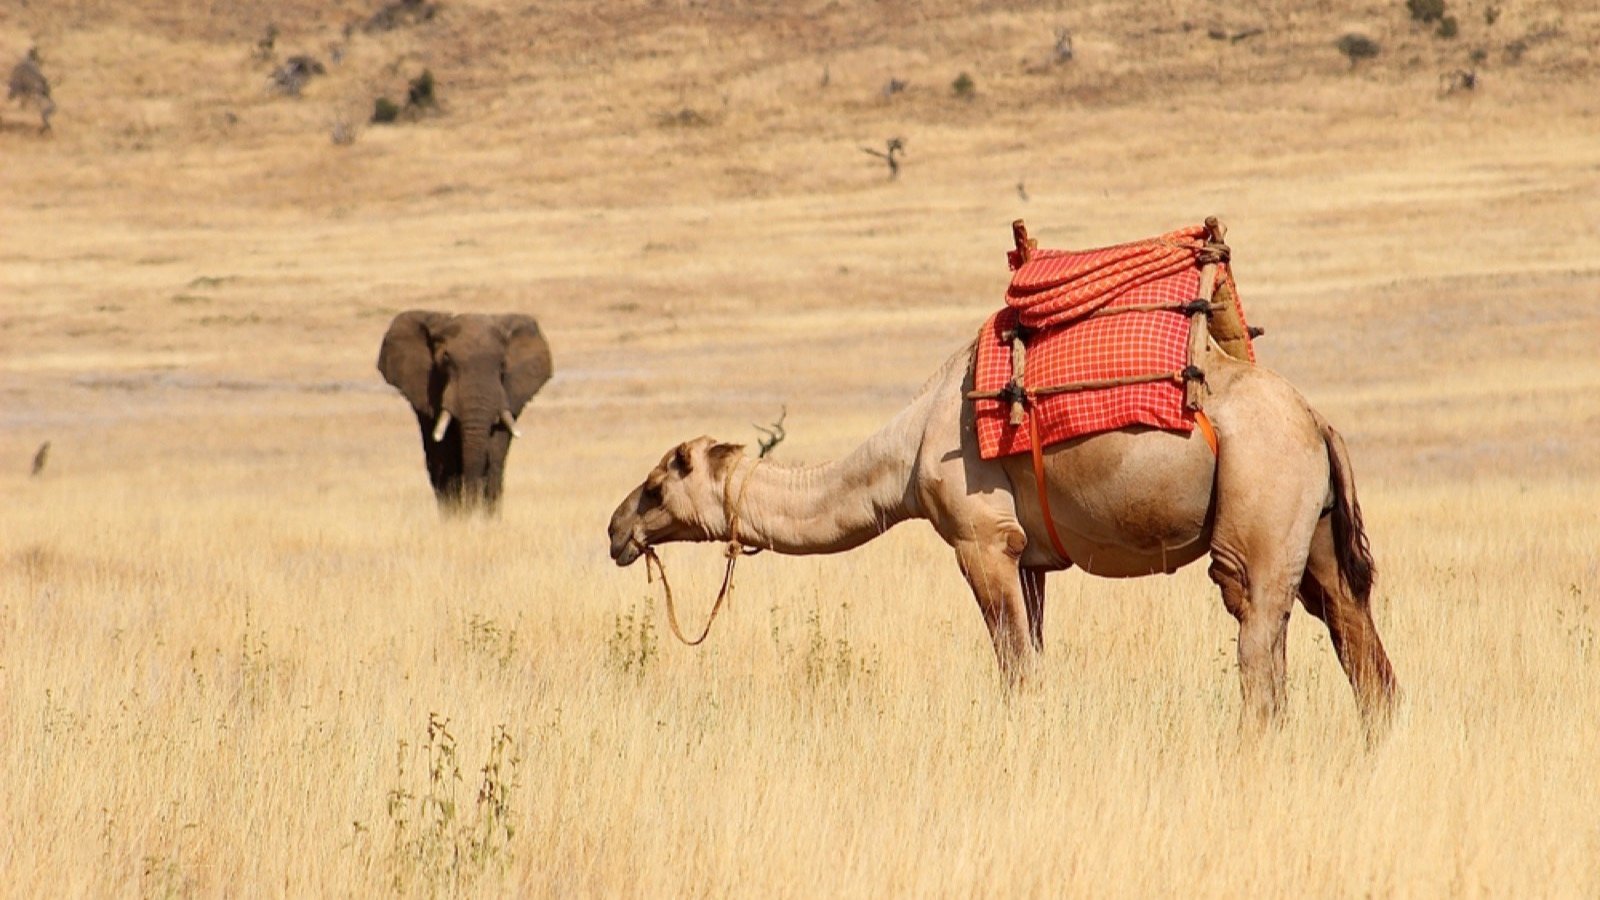 <p>Instead of a horse safari or bumping across the plains in a vehicle, why not travel with nature on an elegant, well-trained camel? Riding this stoic, hardy animal is the perfect way to get closer to wildlife like giraffes, ostriches, and zebras.</p><p>It’s becoming an increasingly popular way to enjoy an African safari, allowing you to reach areas inaccessible to vehicles.</p>